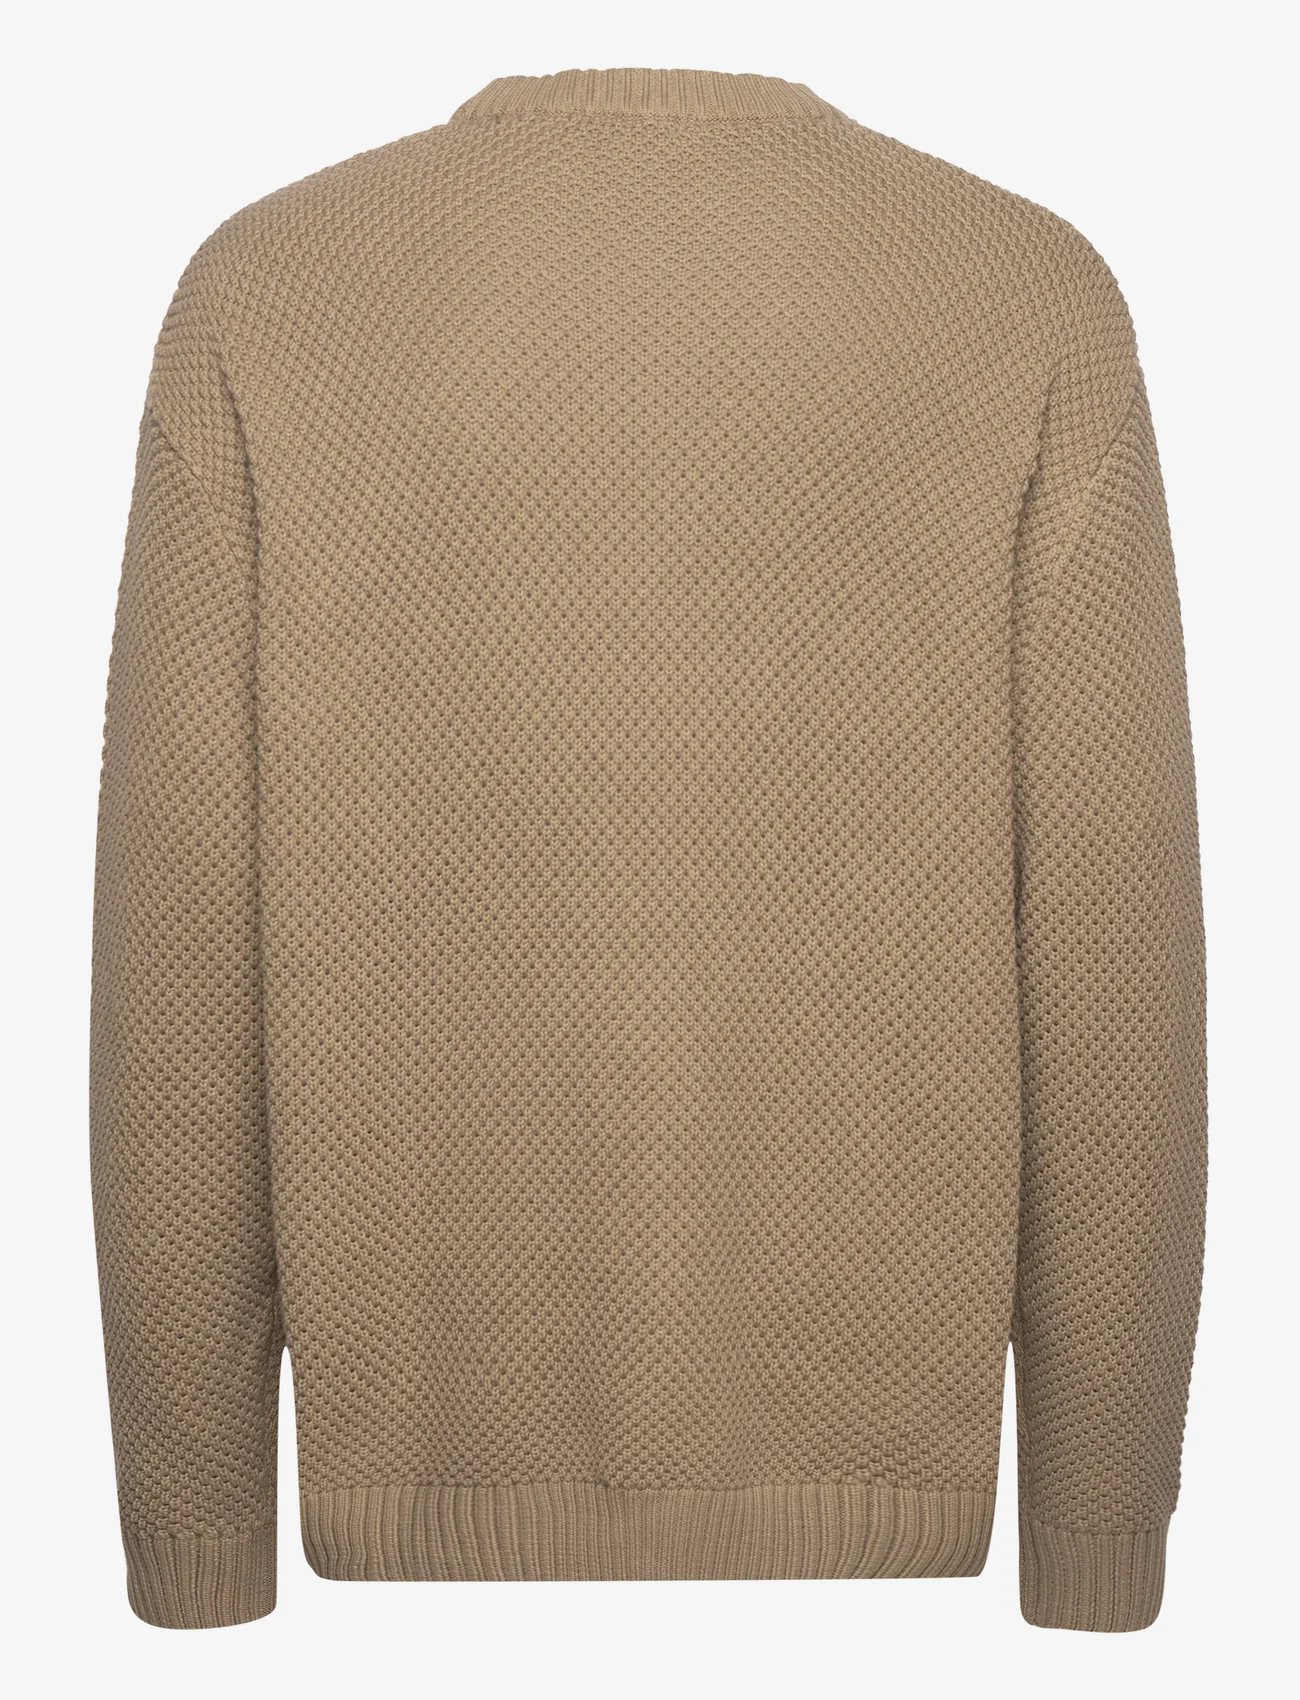 Selected Homme - SLHBERT RELAXED LS KNIT STU CREW NECK W - rund hals - mermaid - 1